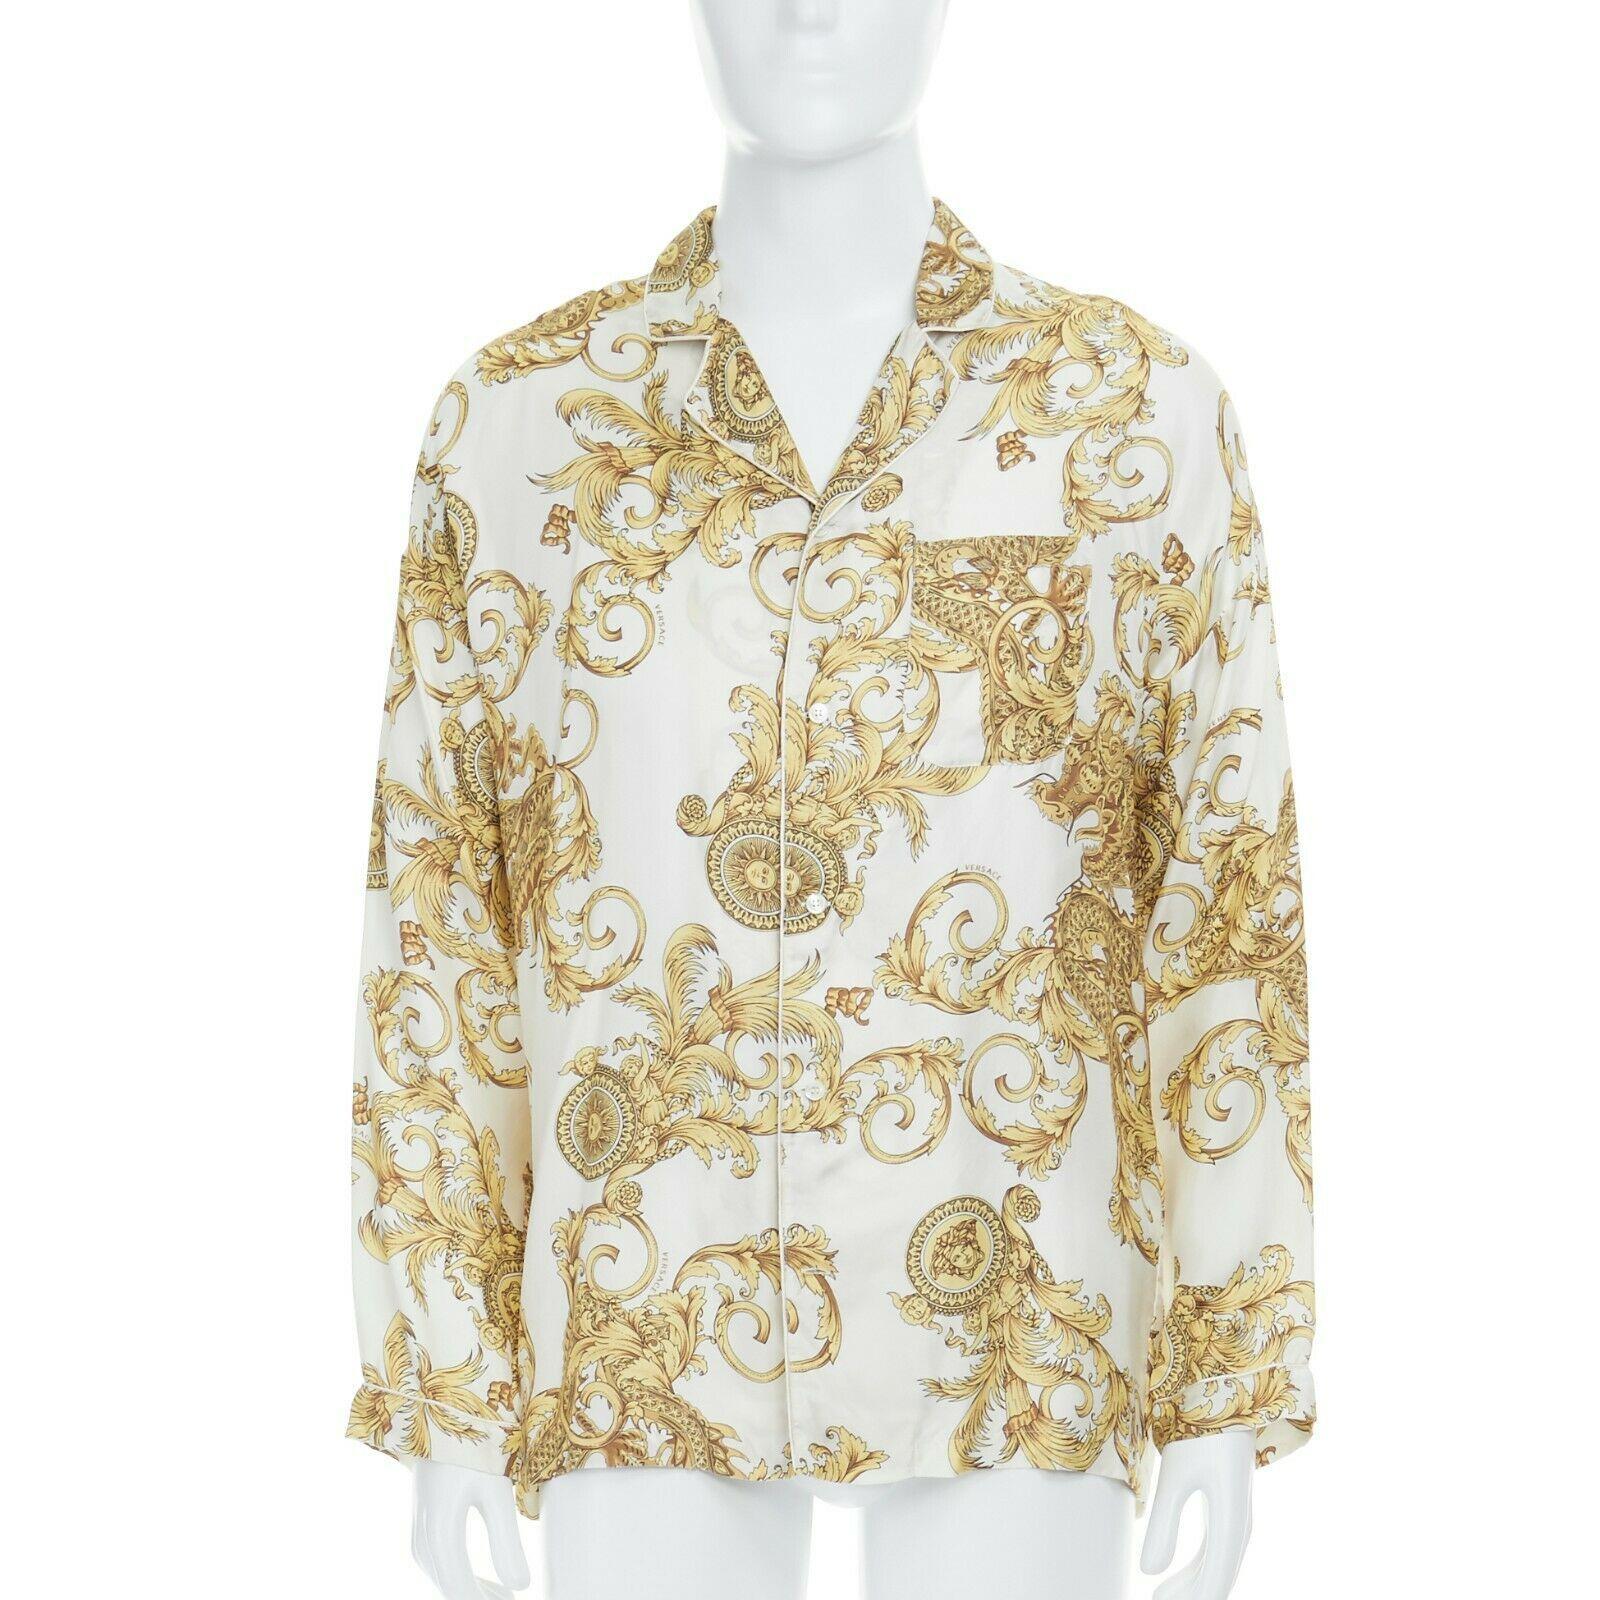 new VERSACE 100% silk white gold dragon Medusa baroque pyjama fit shirt IT3 XS
VERSACE UNDERWEAR
100% silk. 
White base with gold baroque floral print. 
Dargon and Medusa head print. Spread notched collar. 
Piping along collar. Dropped shoulder.